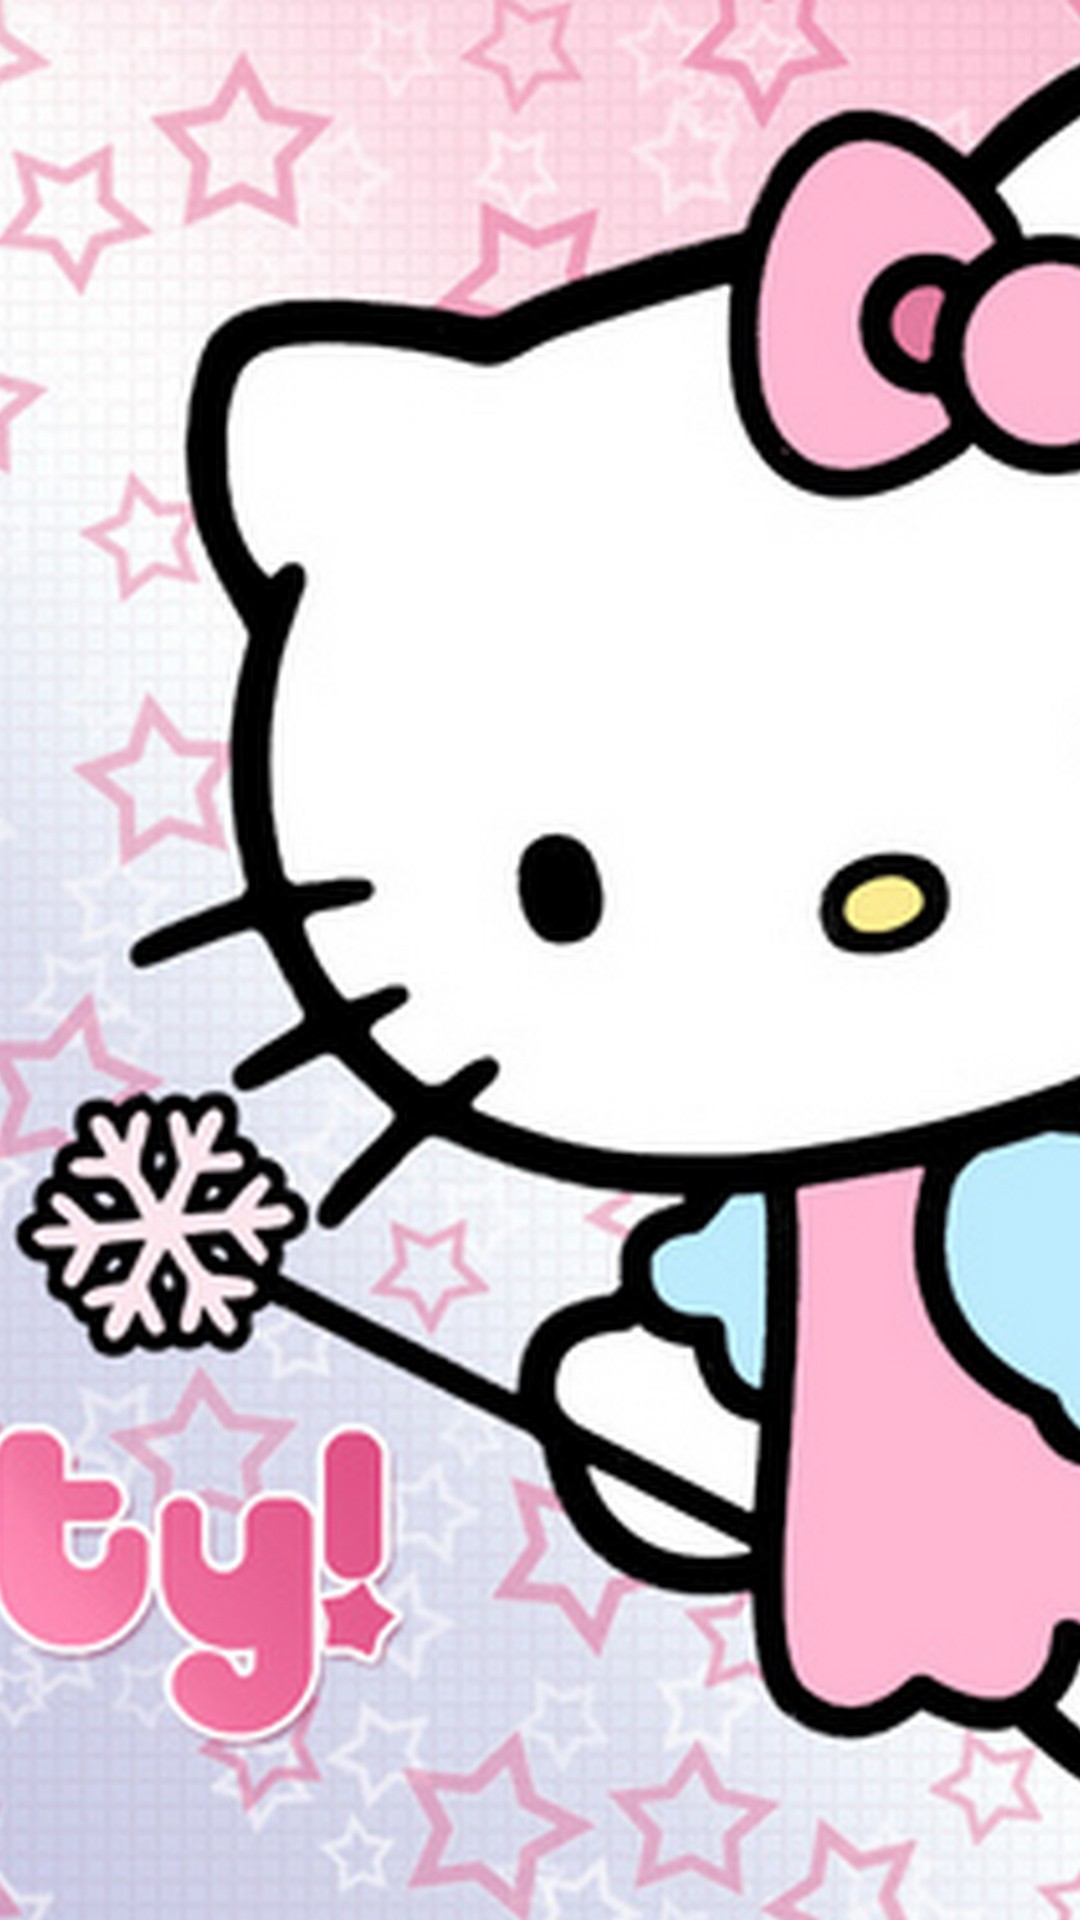 Android Wallpaper Sanrio Hello Kitty with image resolution 1080x1920 pixel. You can make this wallpaper for your Android backgrounds, Tablet, Smartphones Screensavers and Mobile Phone Lock Screen